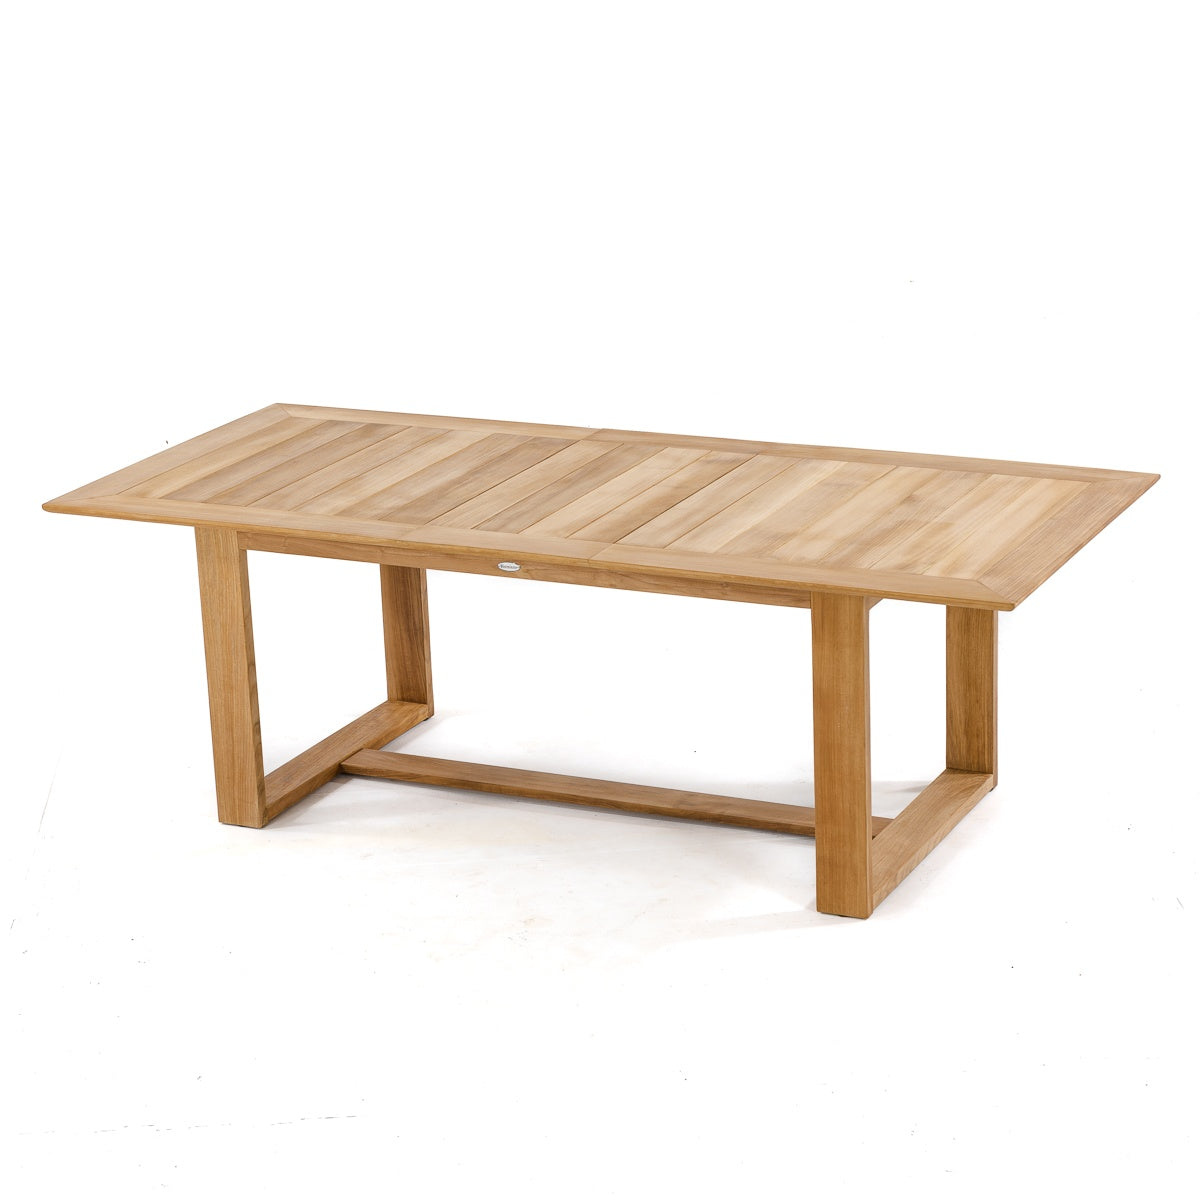 Westminster Teak - Horizon Teak Table Adjusts to 72 or 90 Inches - 15900